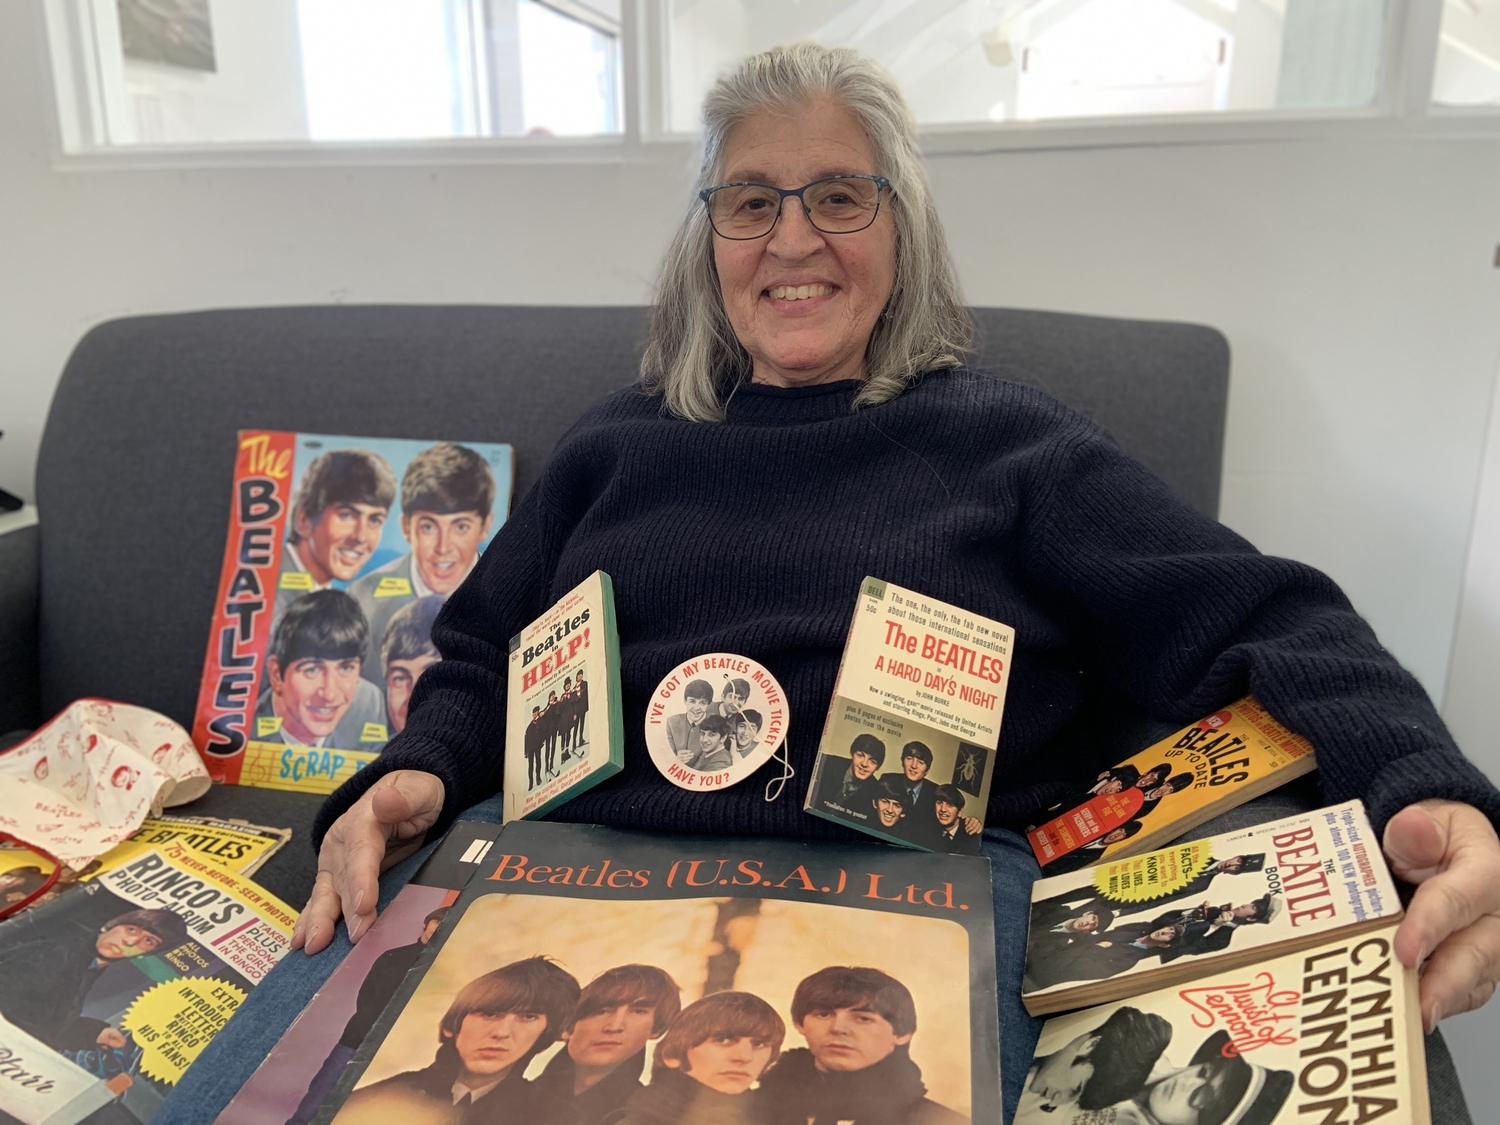 Cathy Worwetz with some of the Beatles memorabilia she collected during the height of Beatlemania, including, on her lap, a copy of the program from the band's 1965 performance at Shea Stadium. STEPHEN J. KOTZ